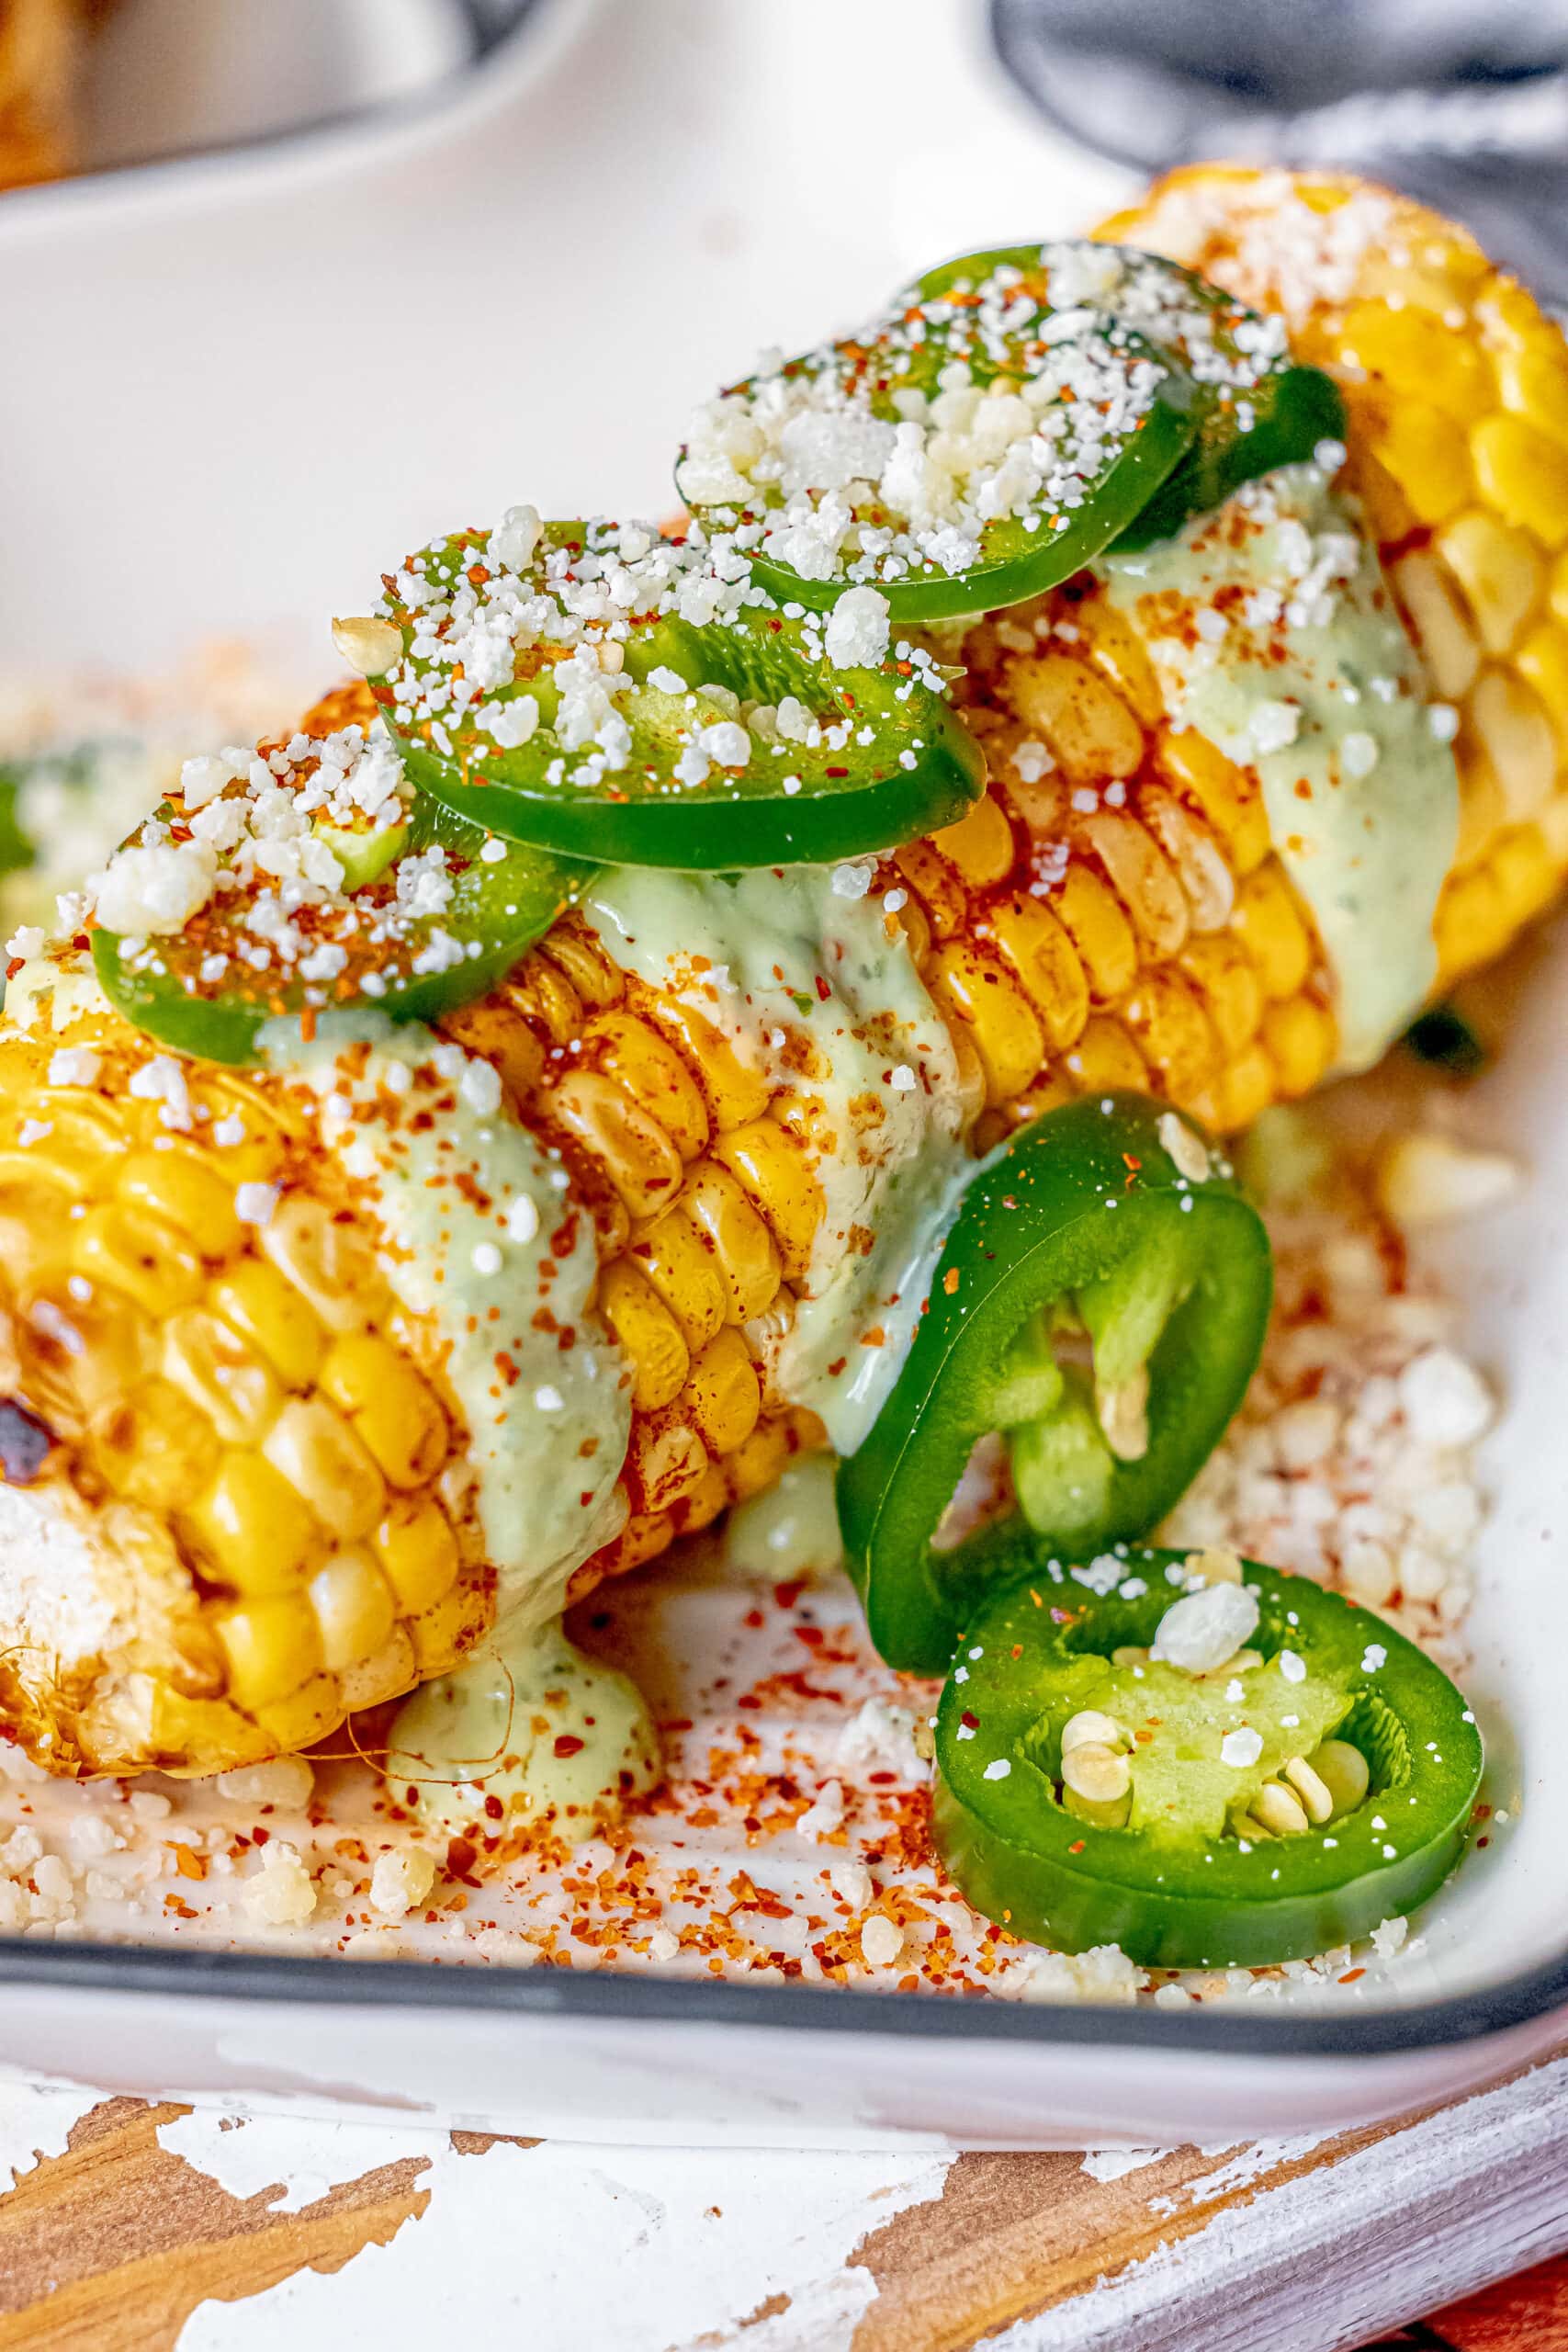 Corn on the cob with jalapenos, salsa, and elotes.